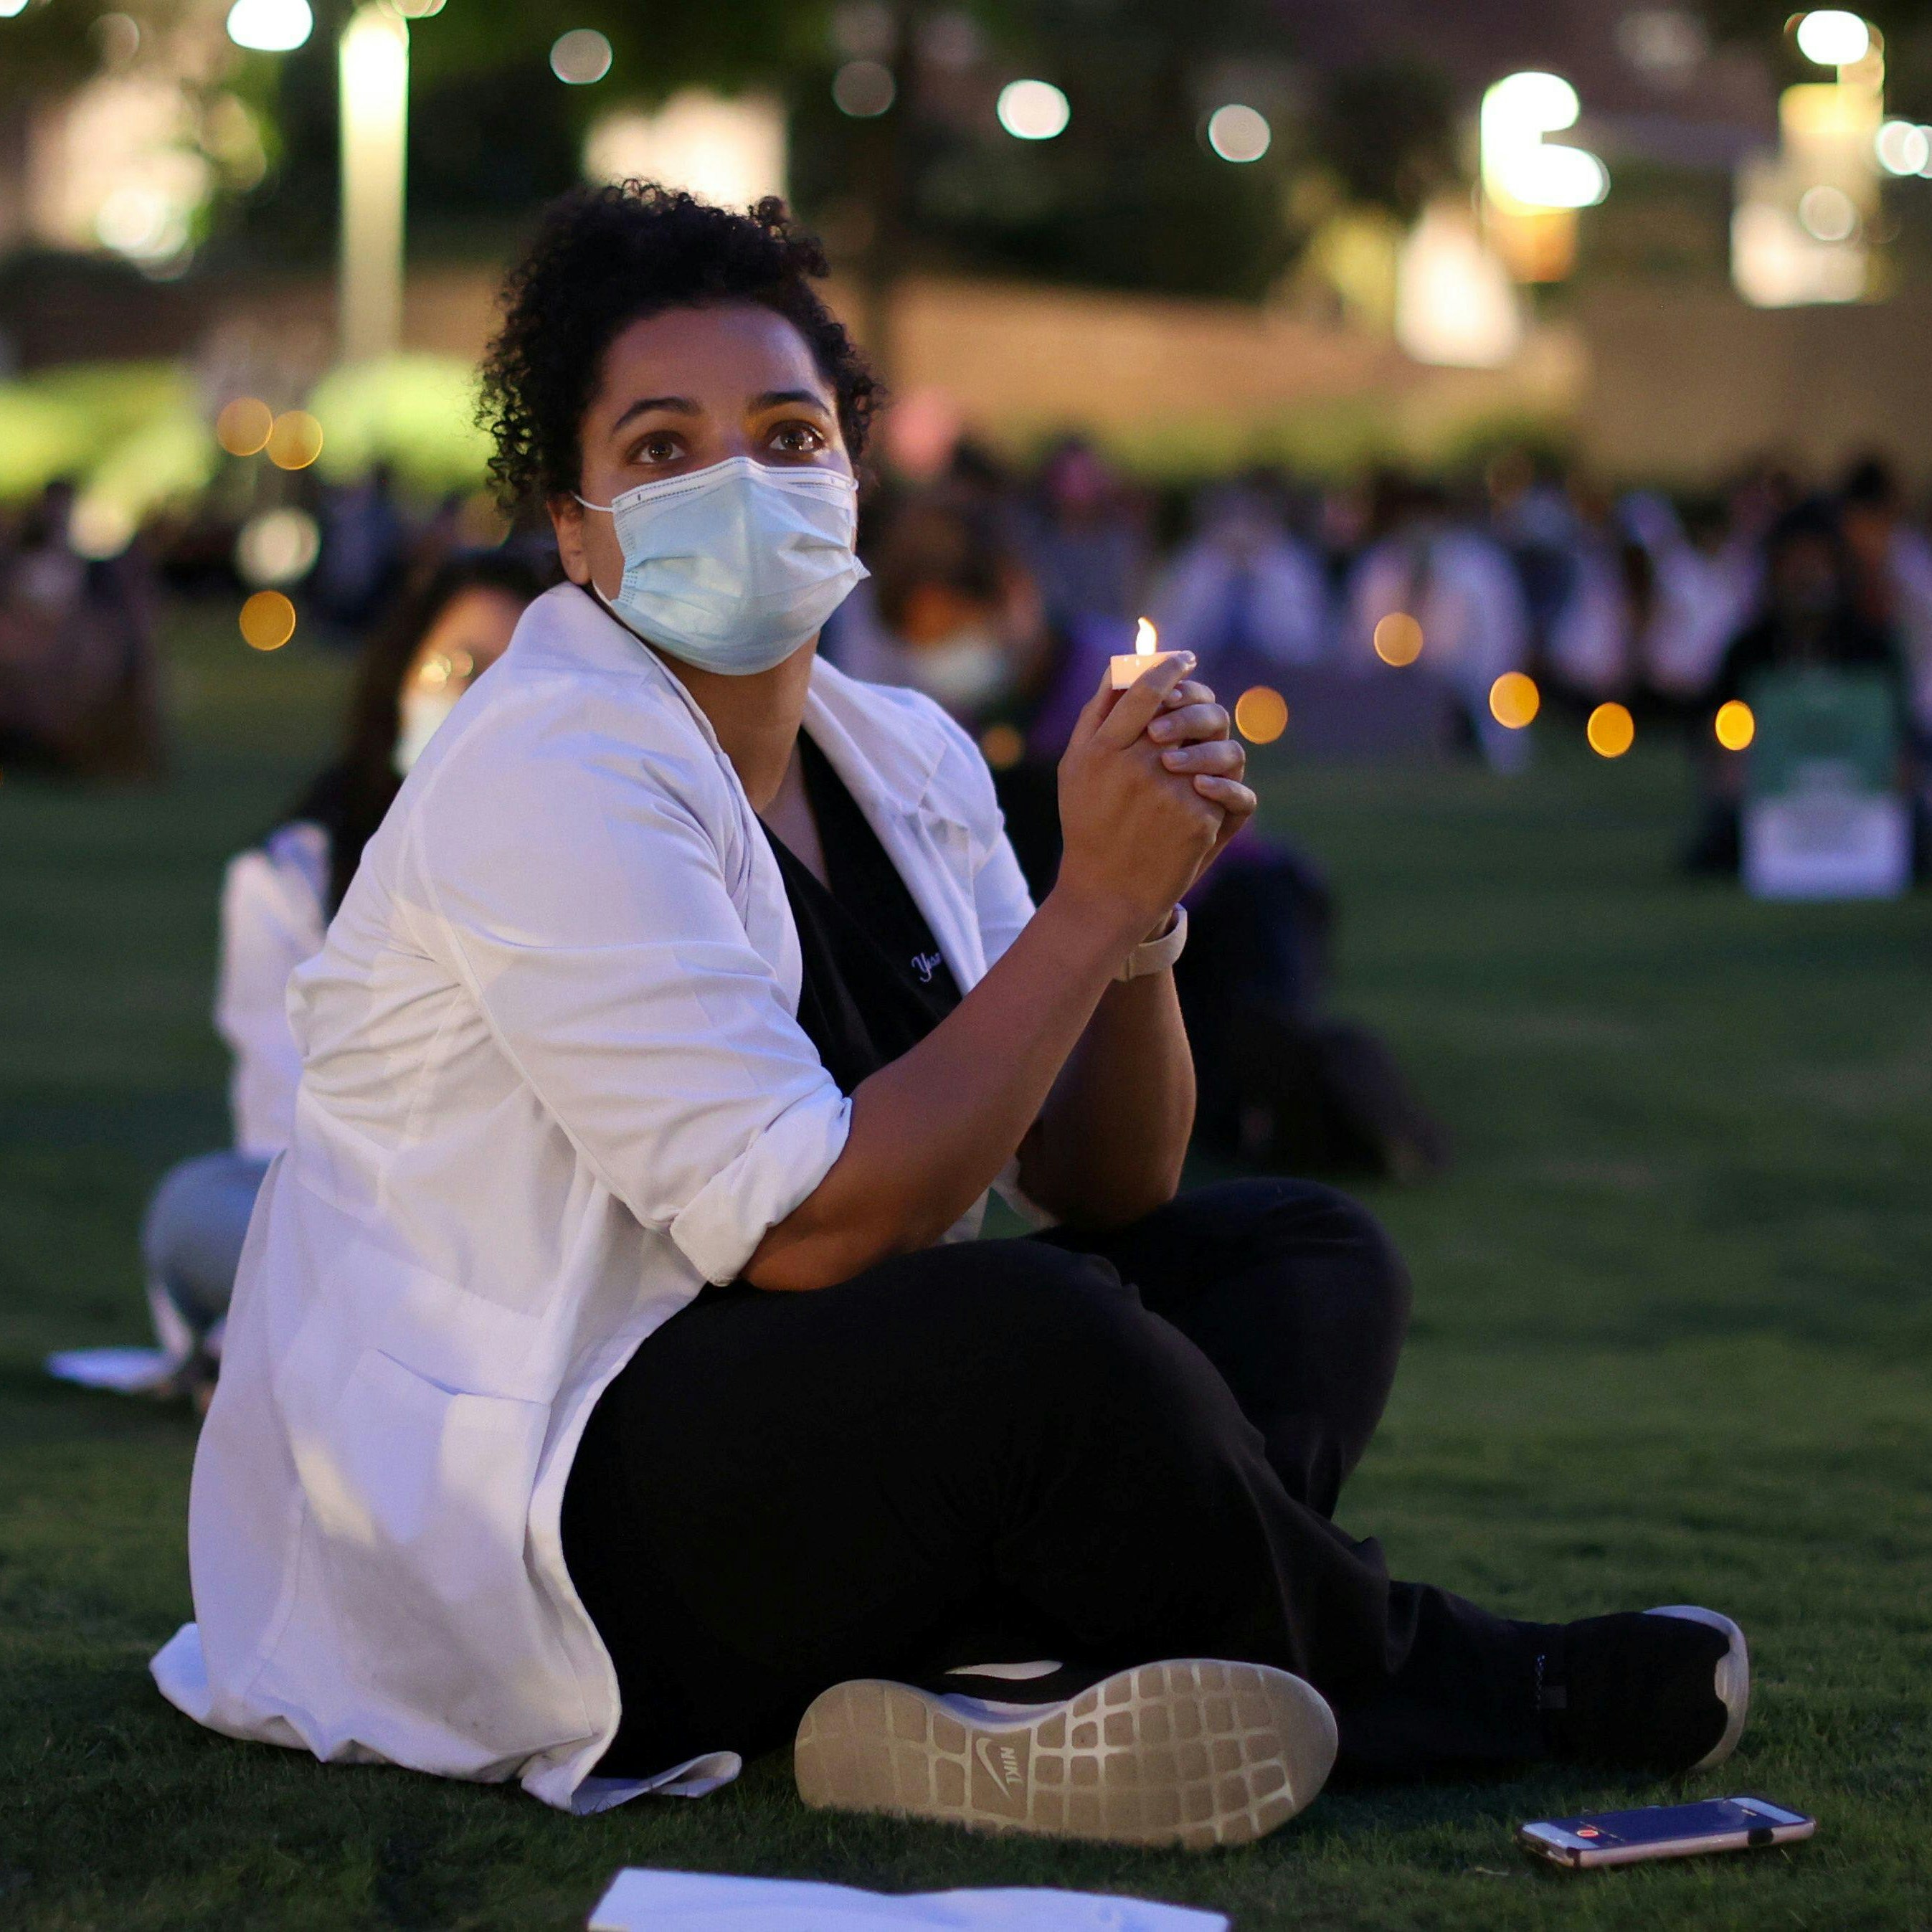 Student sitting on grass with candlelight, possibly at a vigil